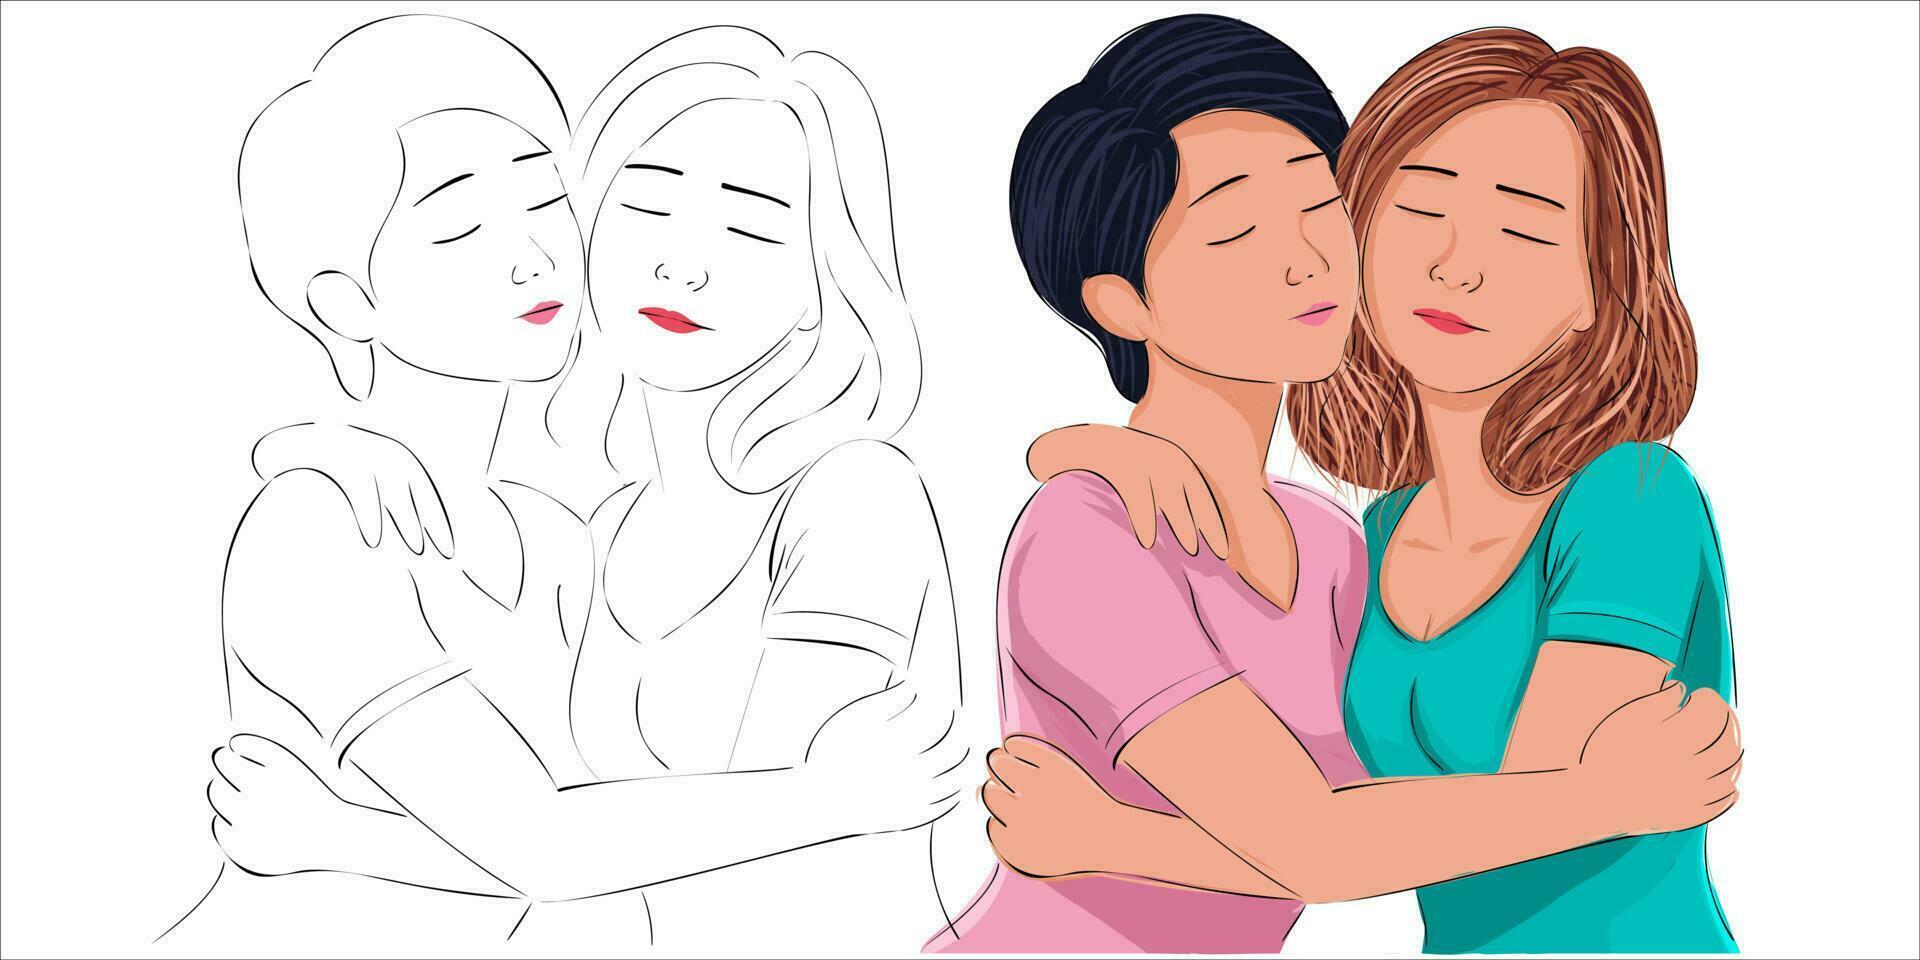 Asian European Lesbian couple flat design illustration. Portrait of two beautiful girls in an intimate abstraction pic